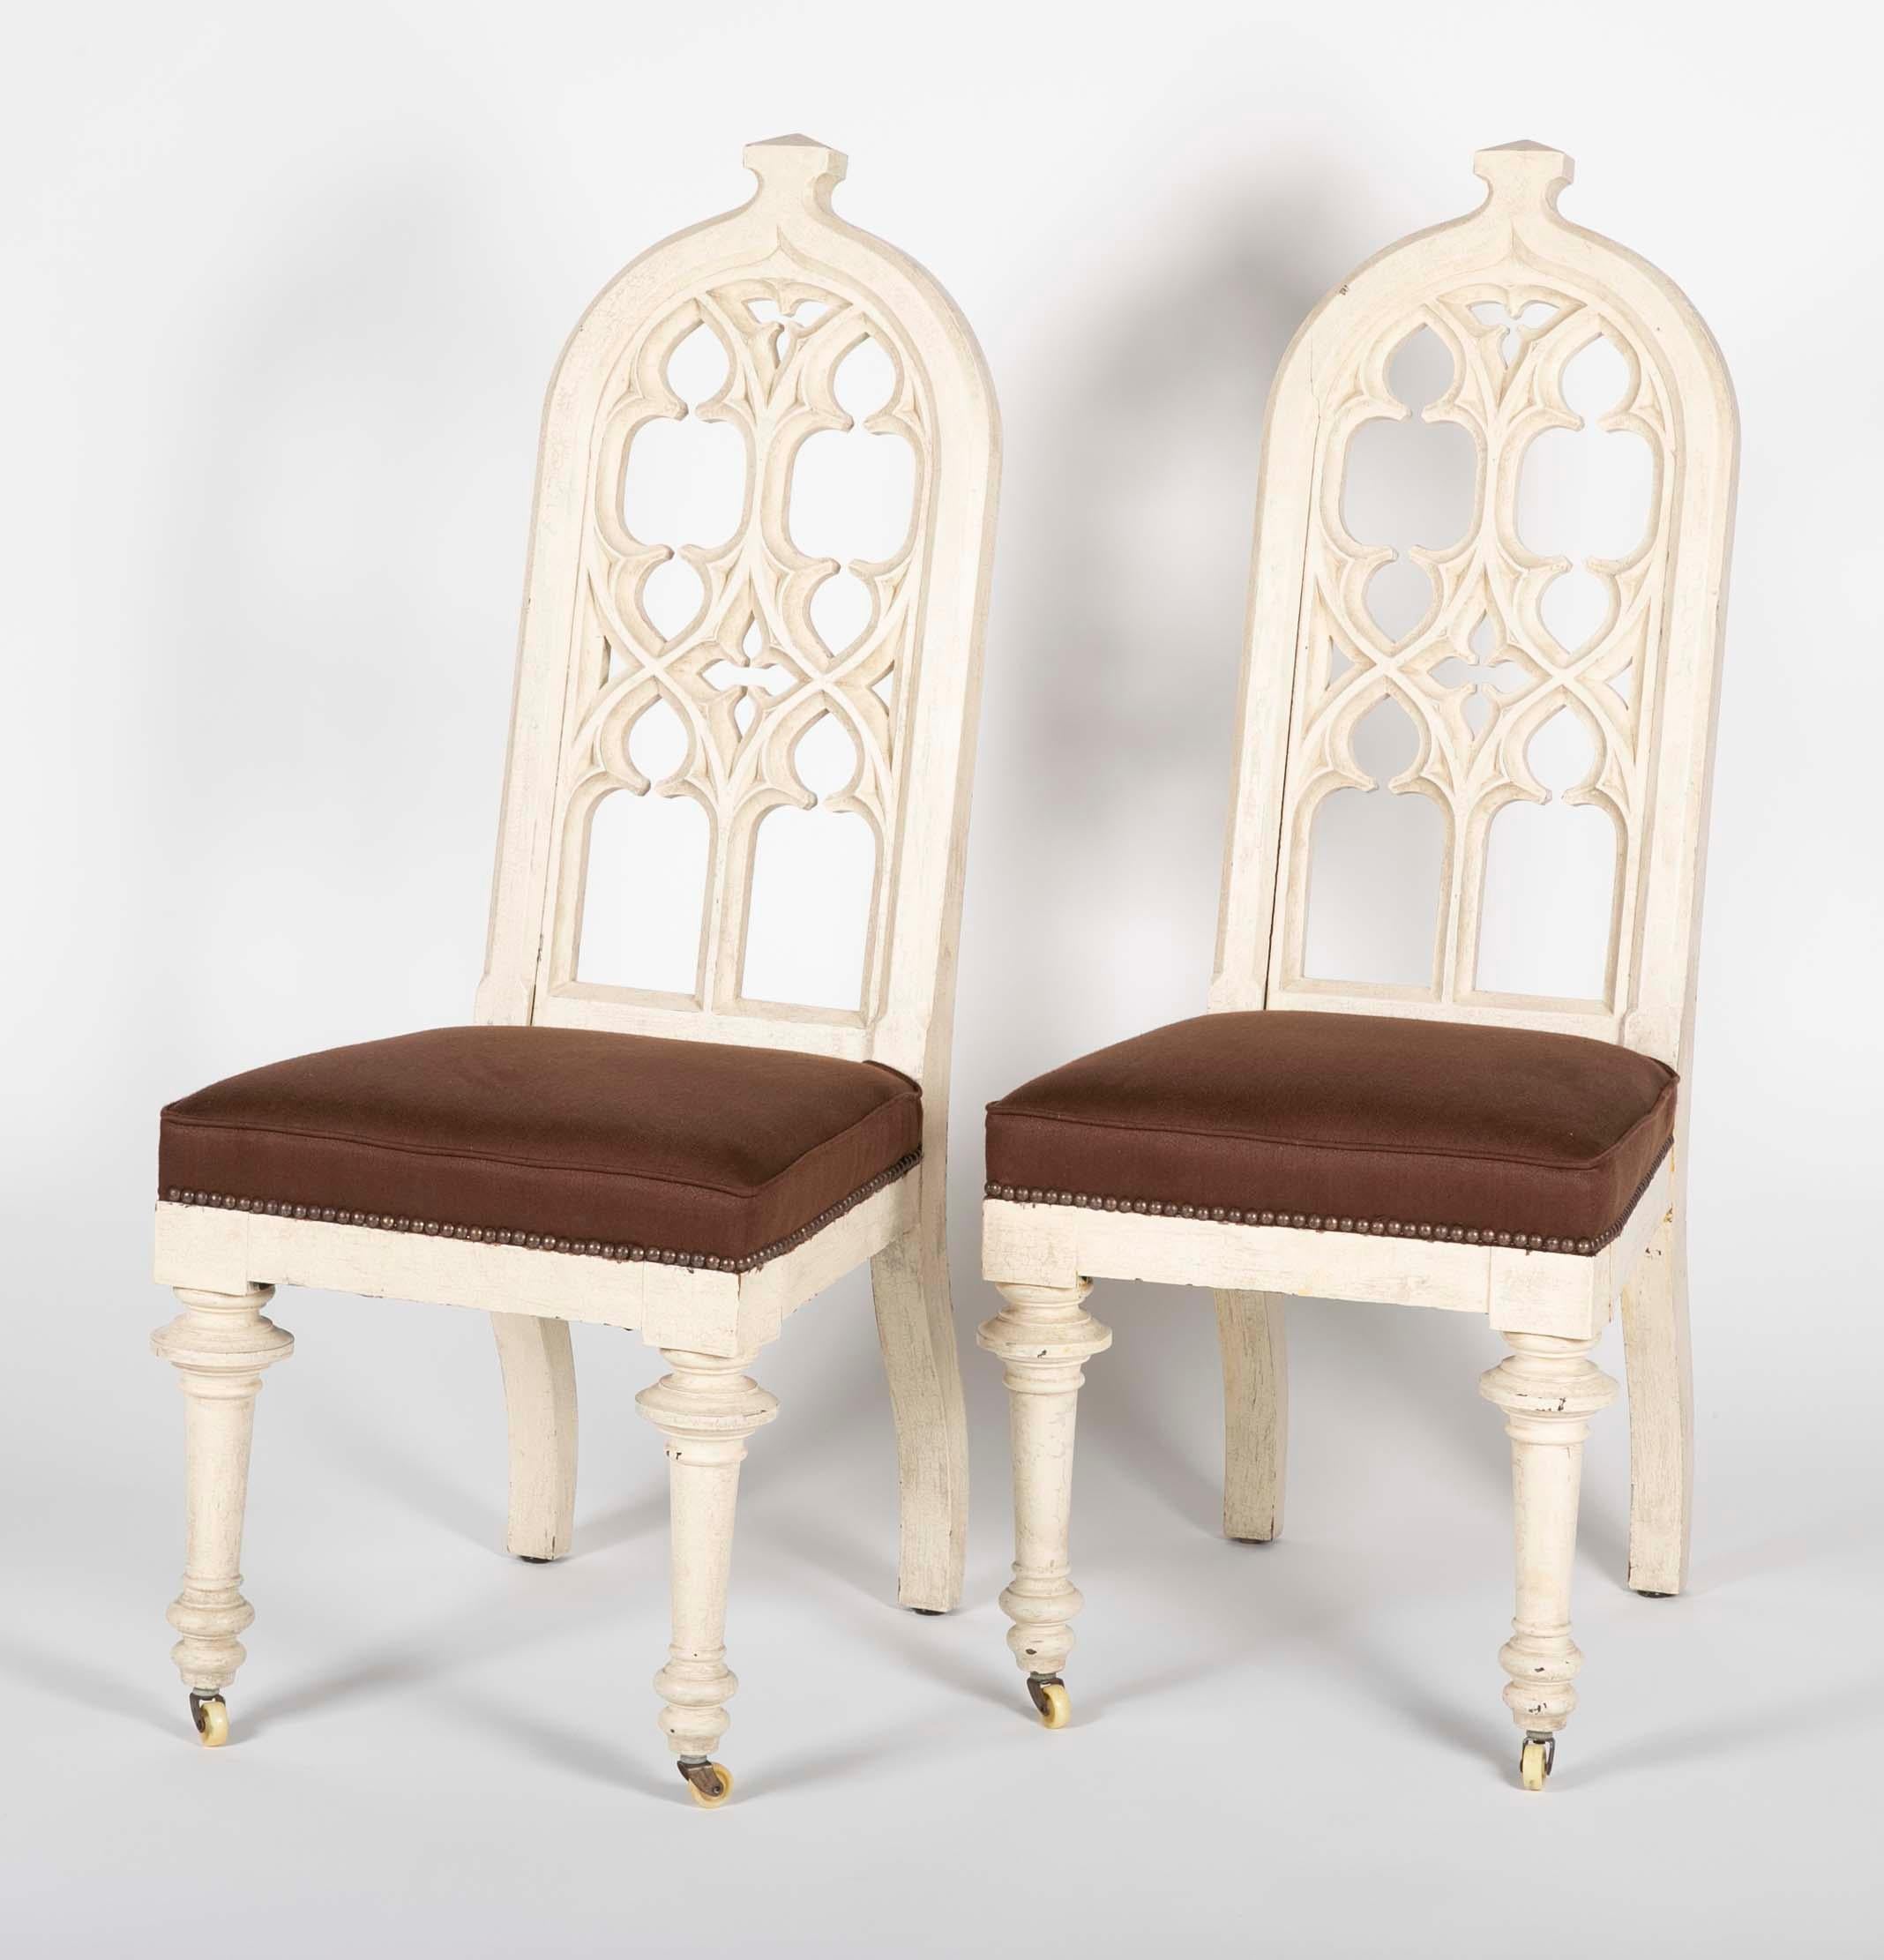 A pair of Gothic Revival chairs styled by Dorothy Draper.